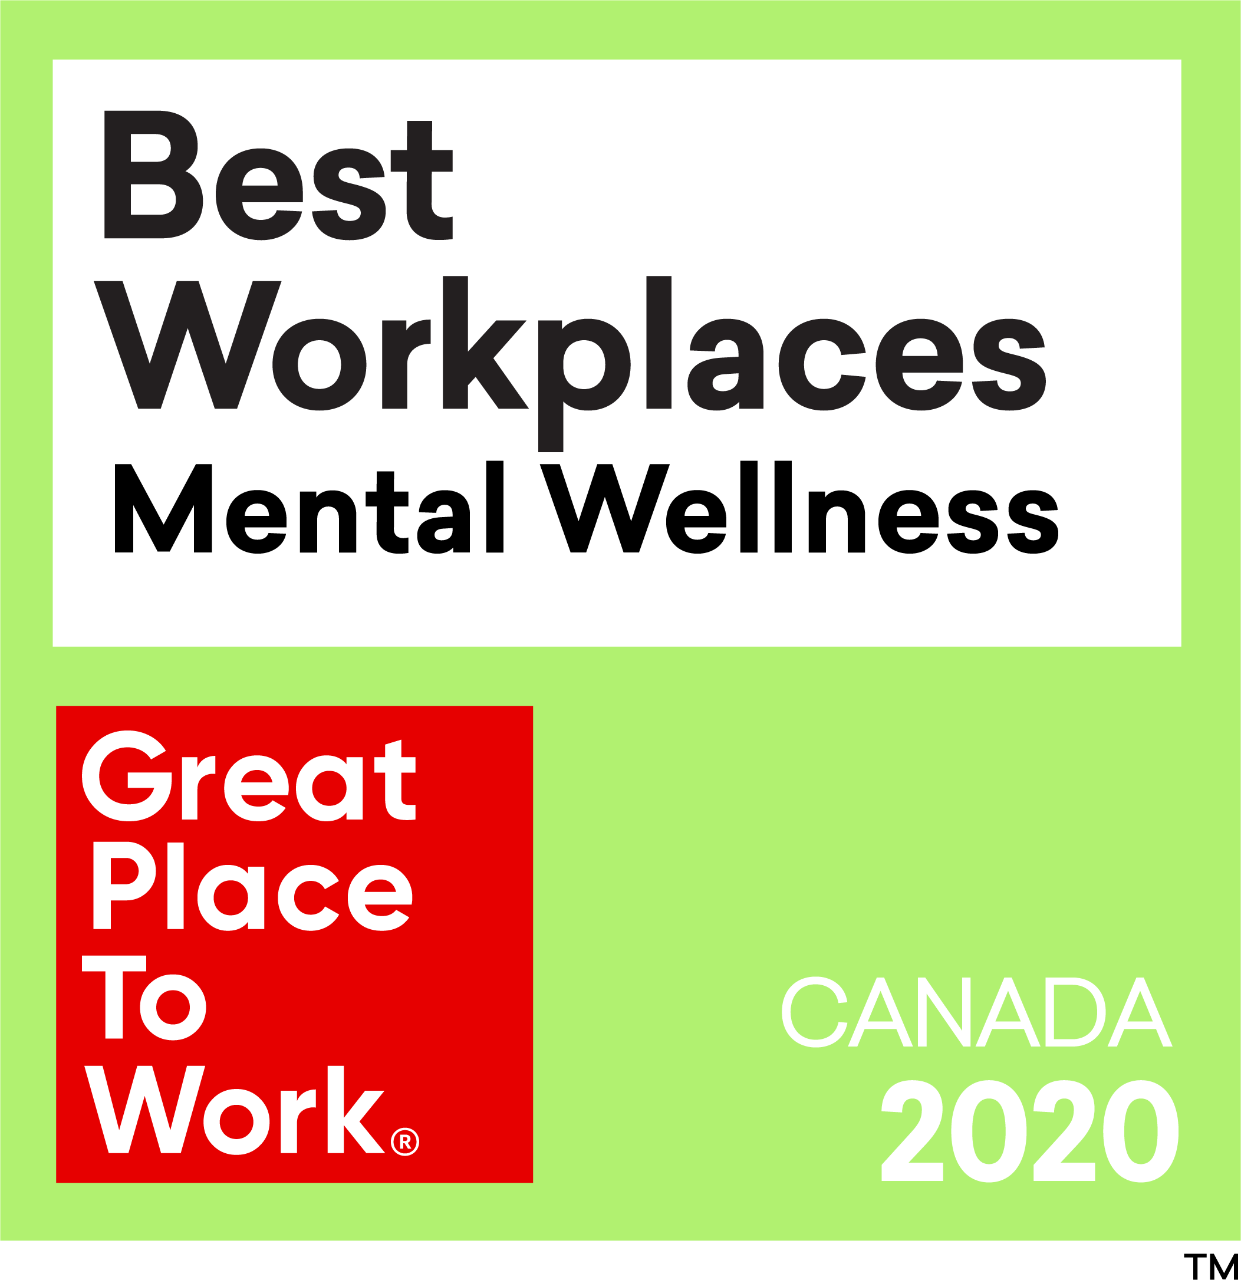 Best Workplaces in Chile 2018